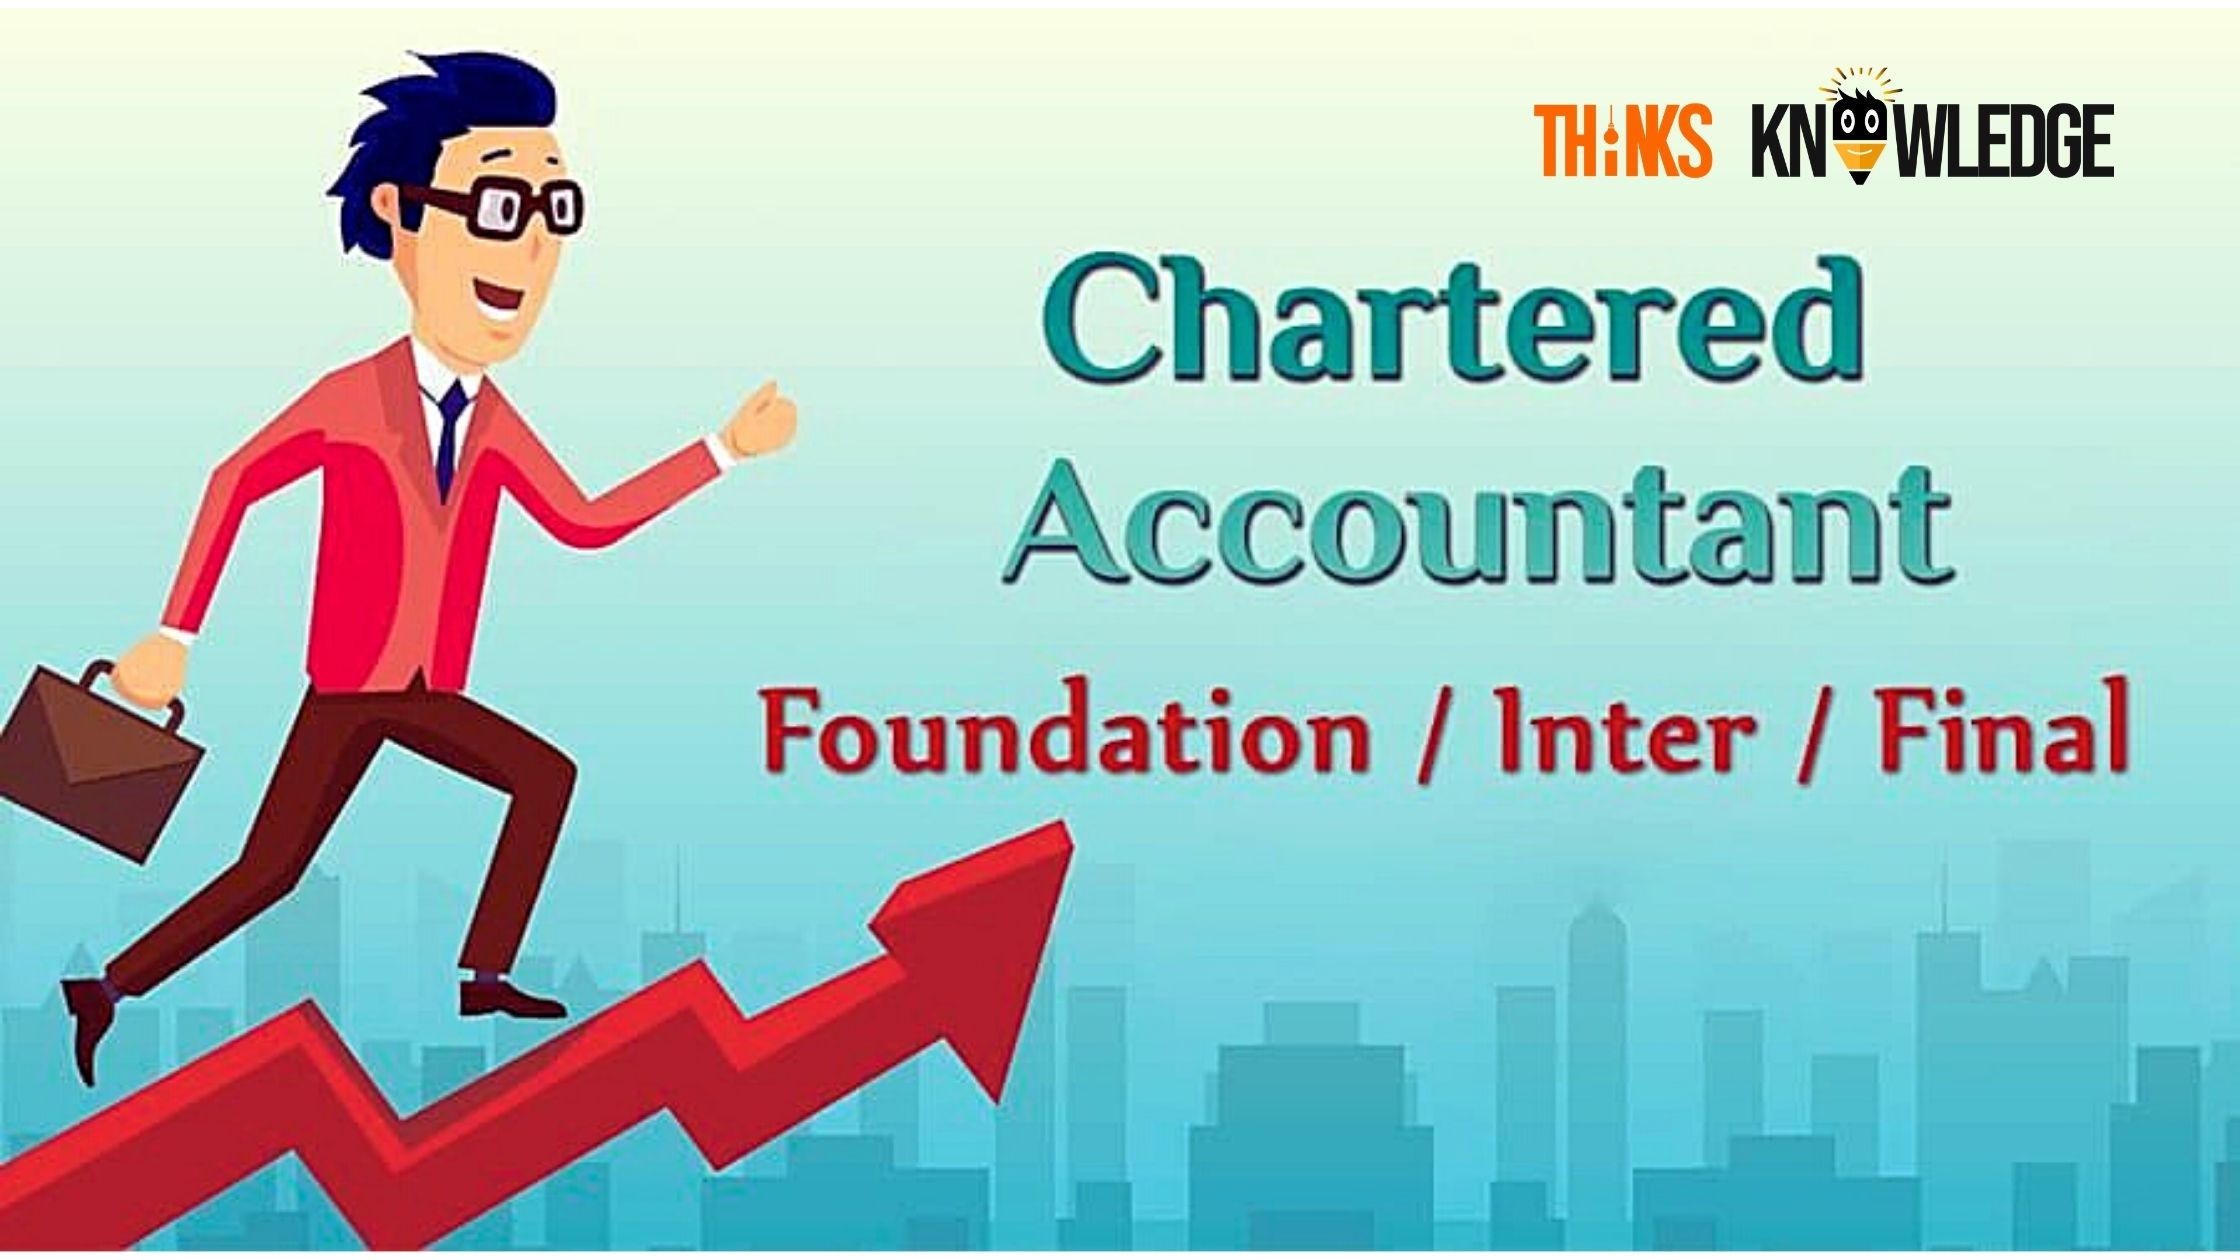 How to Become a Chartered Accountant in India